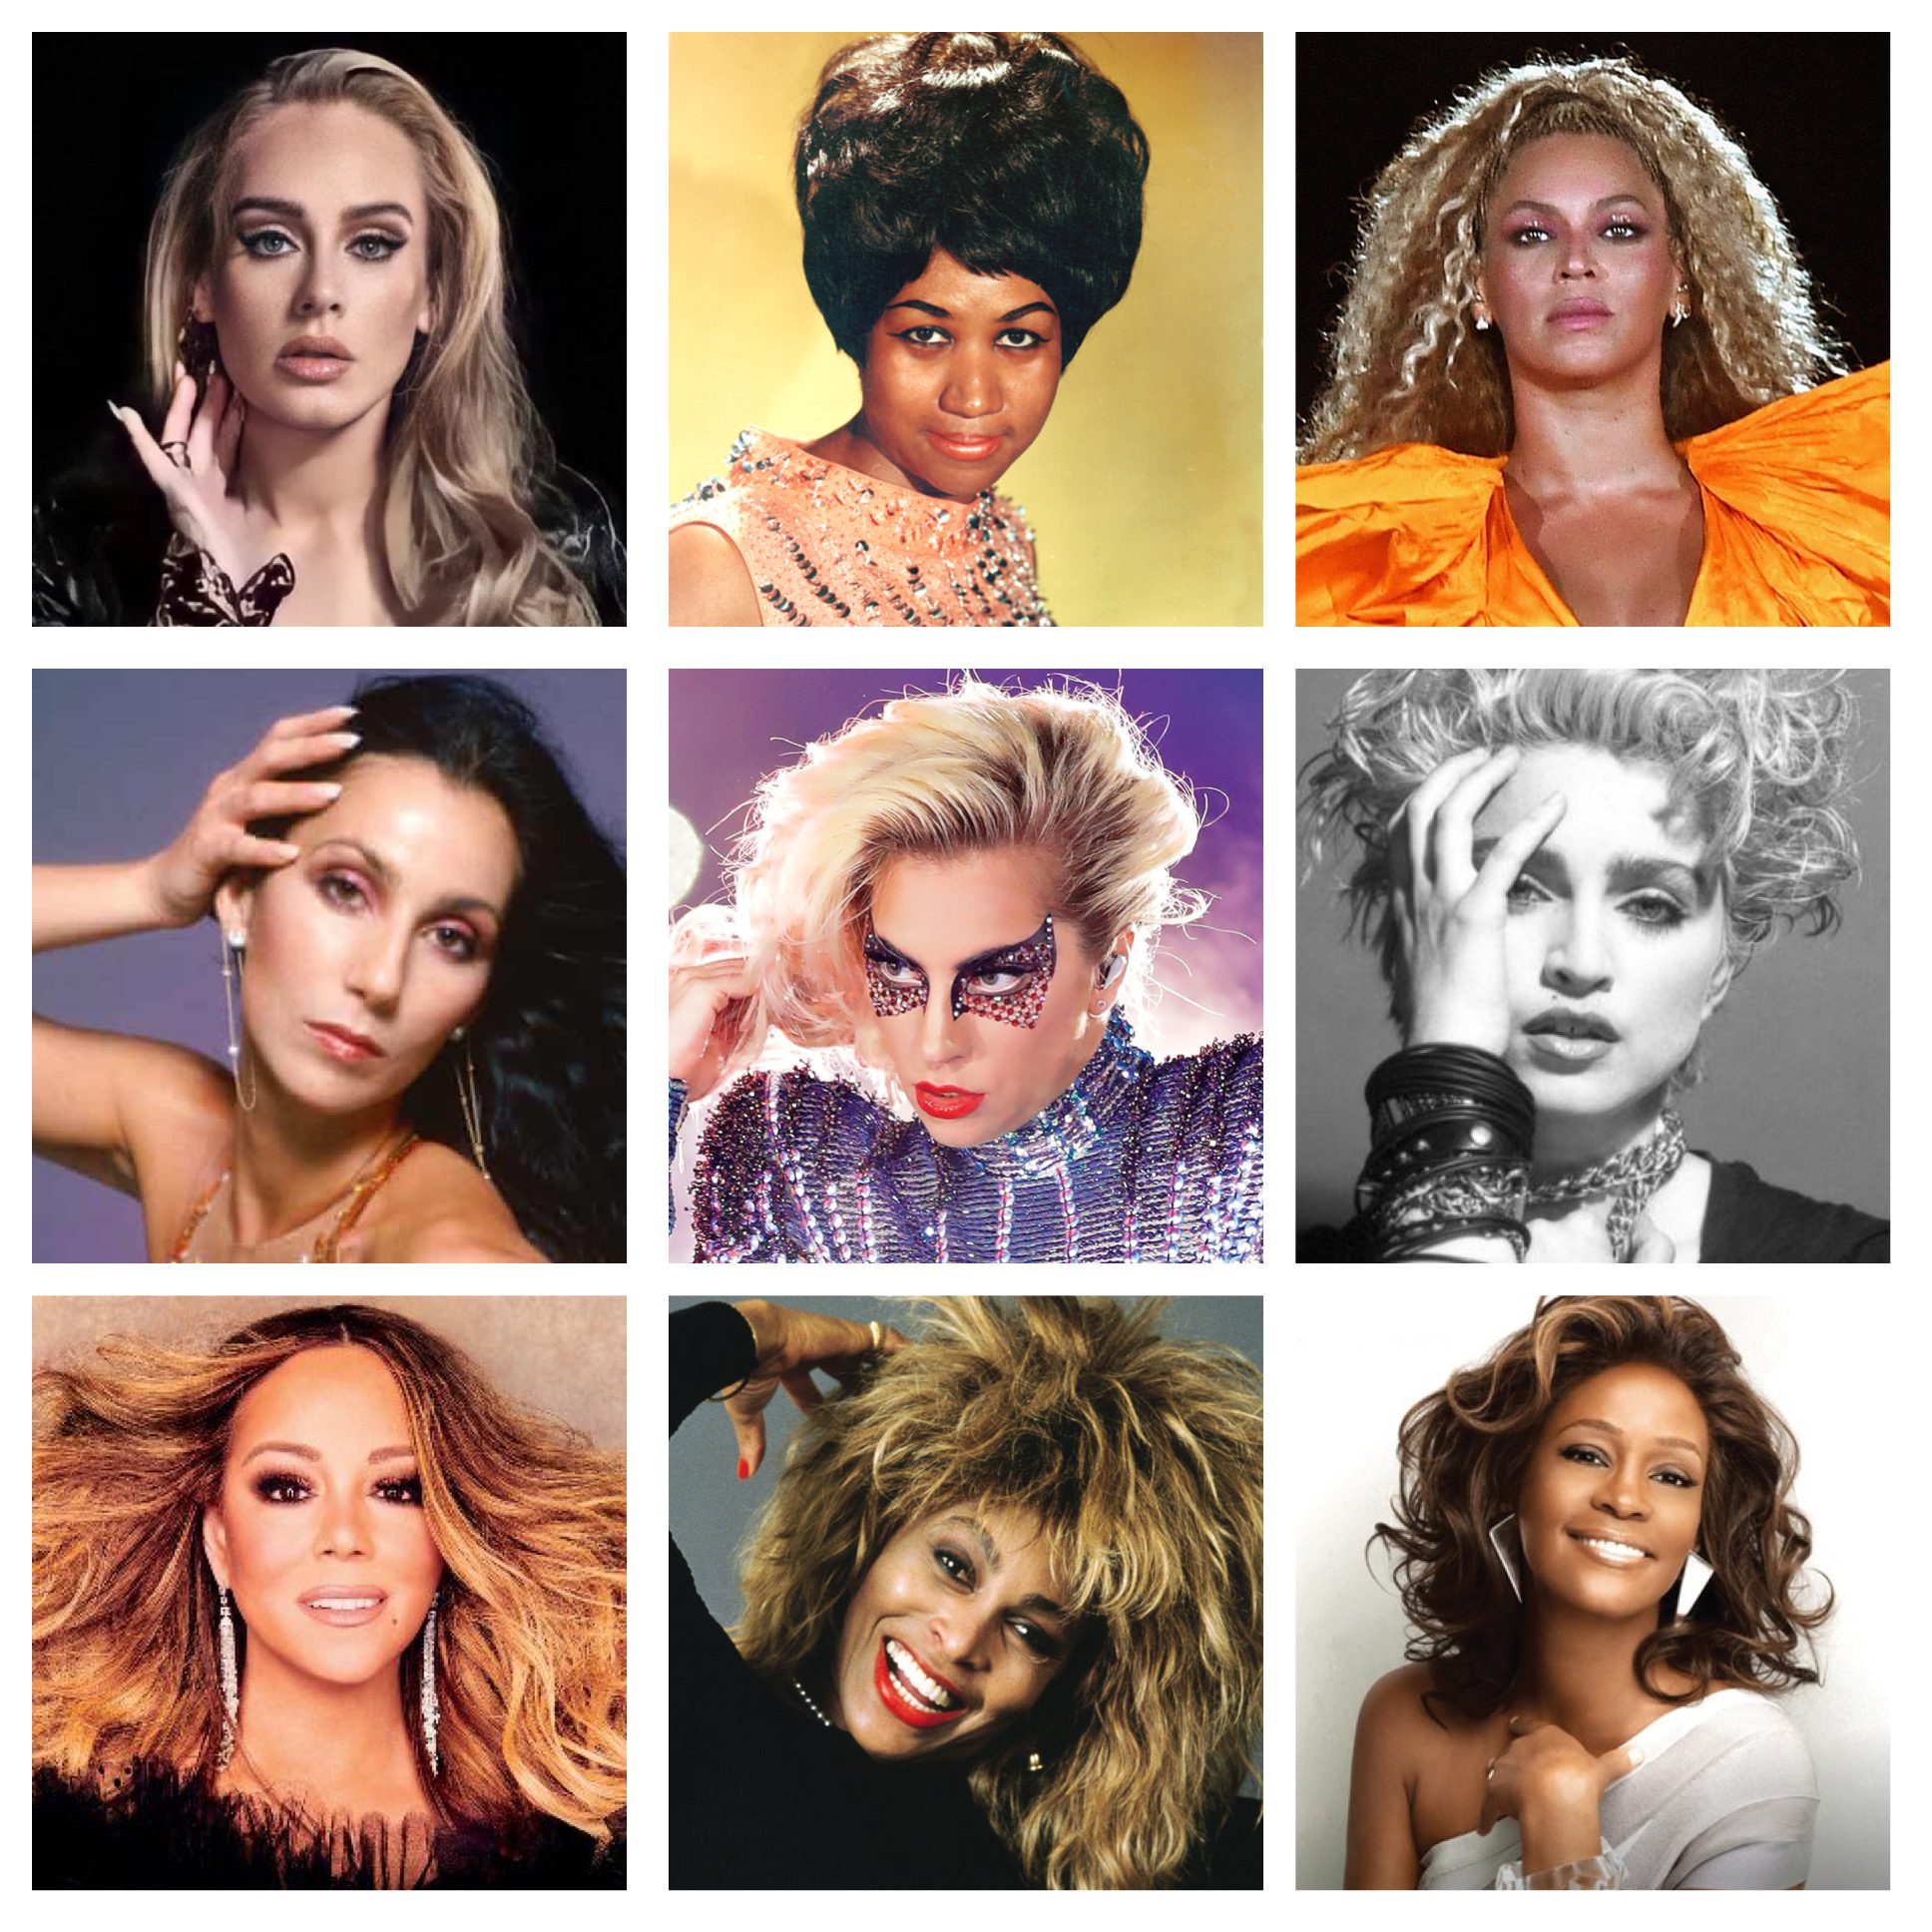 Which Artist Do You Want Crowned as the Ultimate Pop Diva? Vote Now!